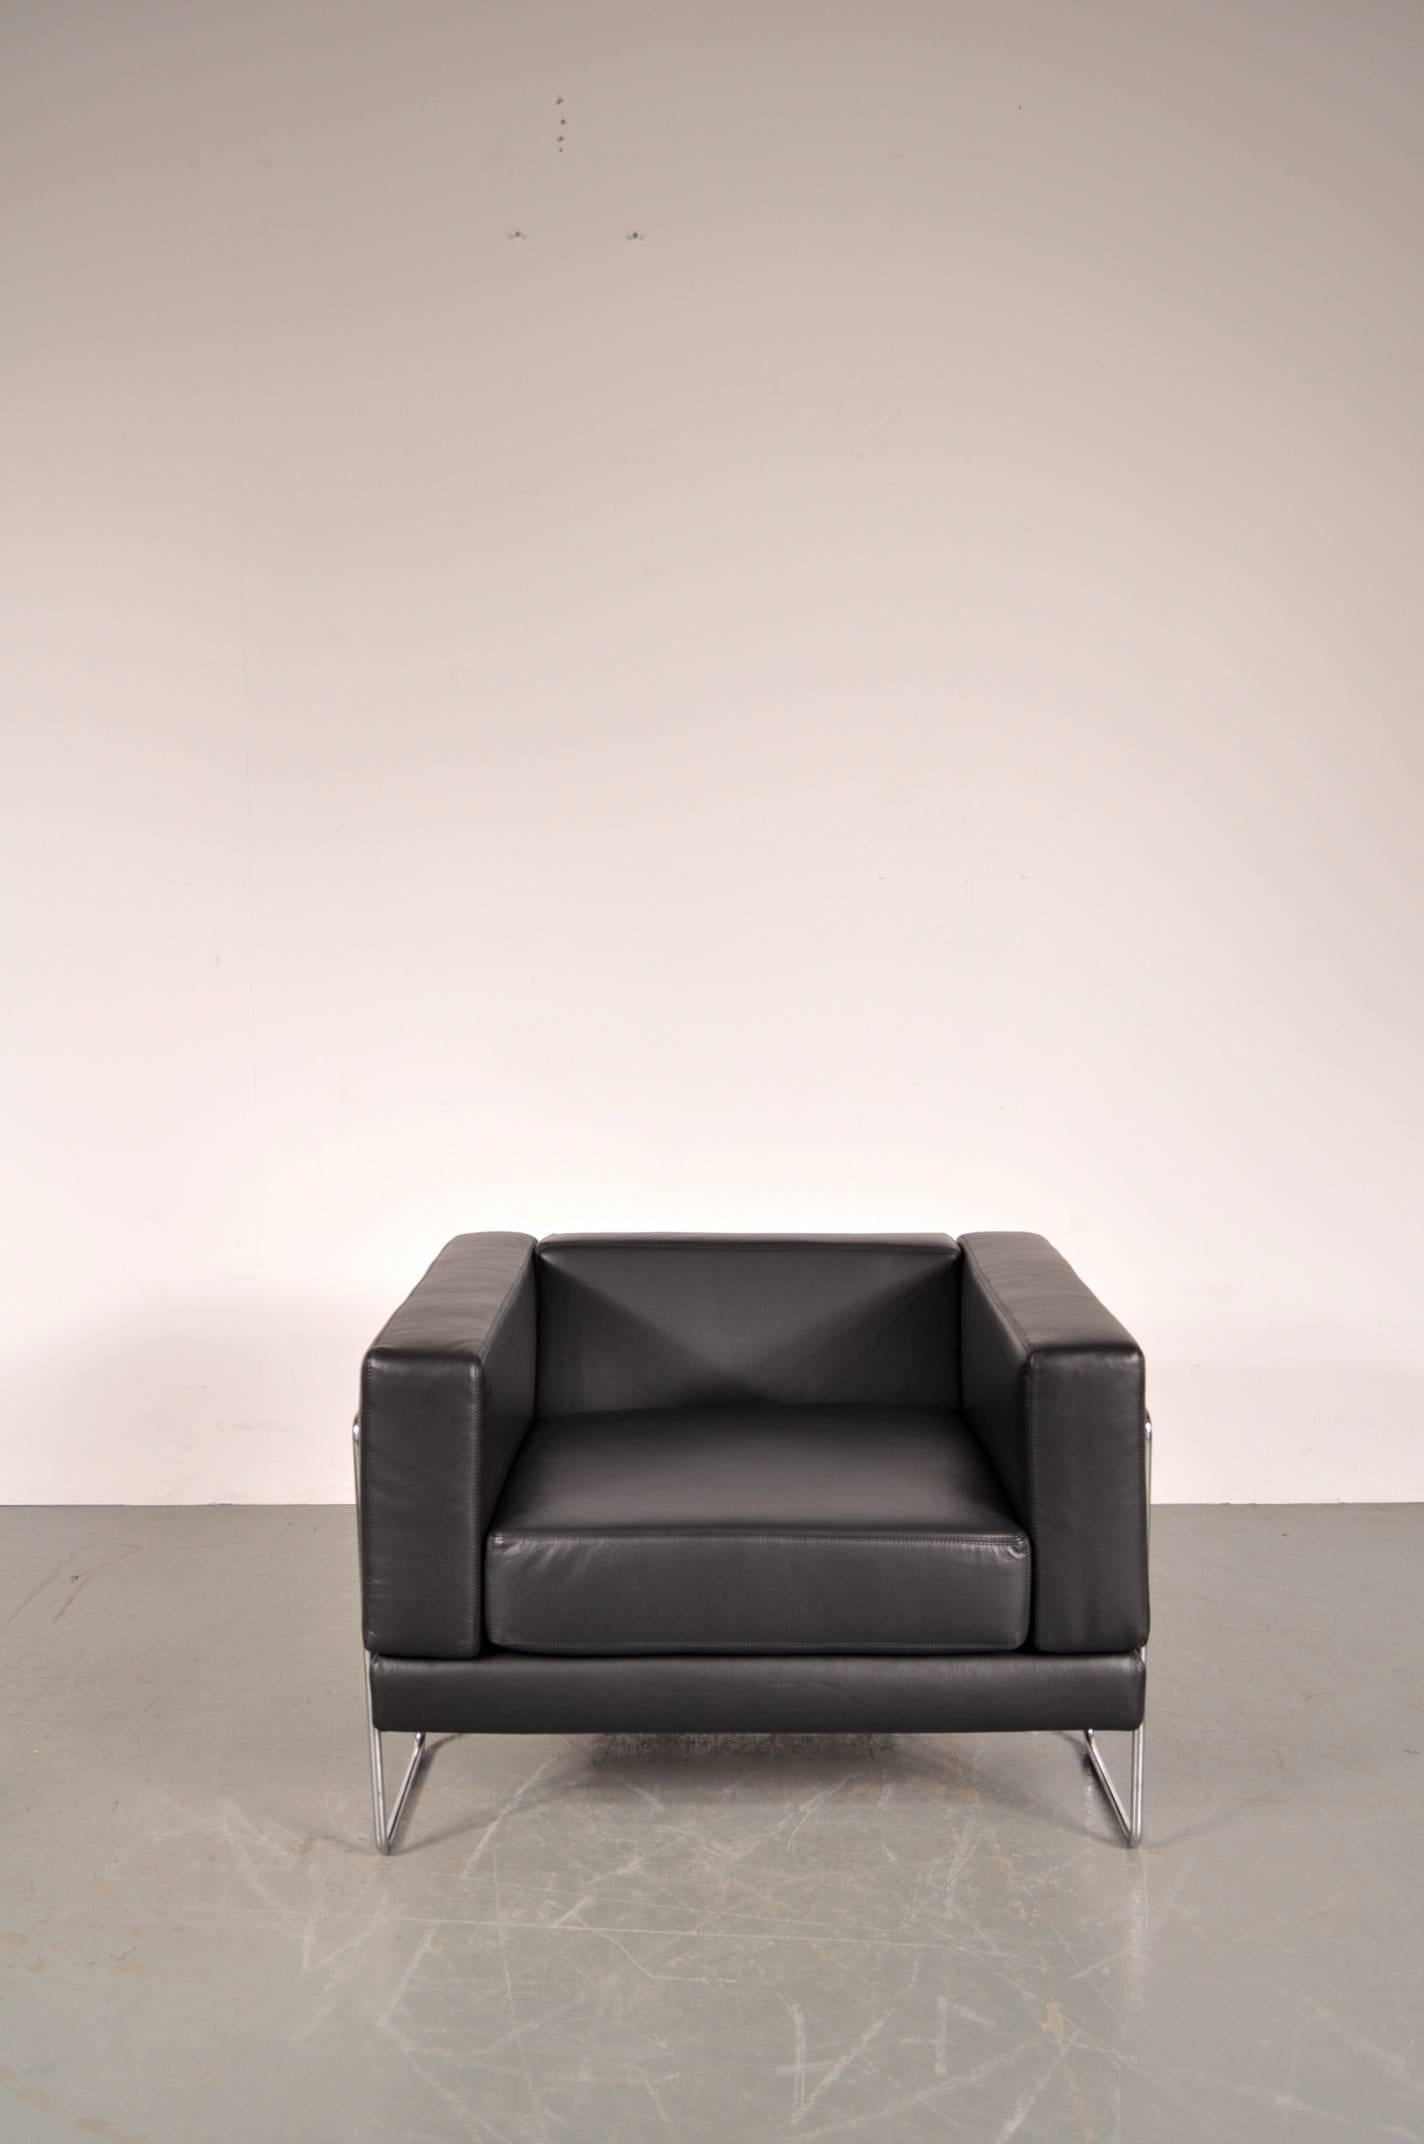 Beautiful lounge chair designed bij Kwok Hoï Chan, manufactured by Steiner in France in 1969.

This chair is newly upholstered in amazing quality black leather. It's chrome metal frame is clearly visible creating a unique, geometrical design